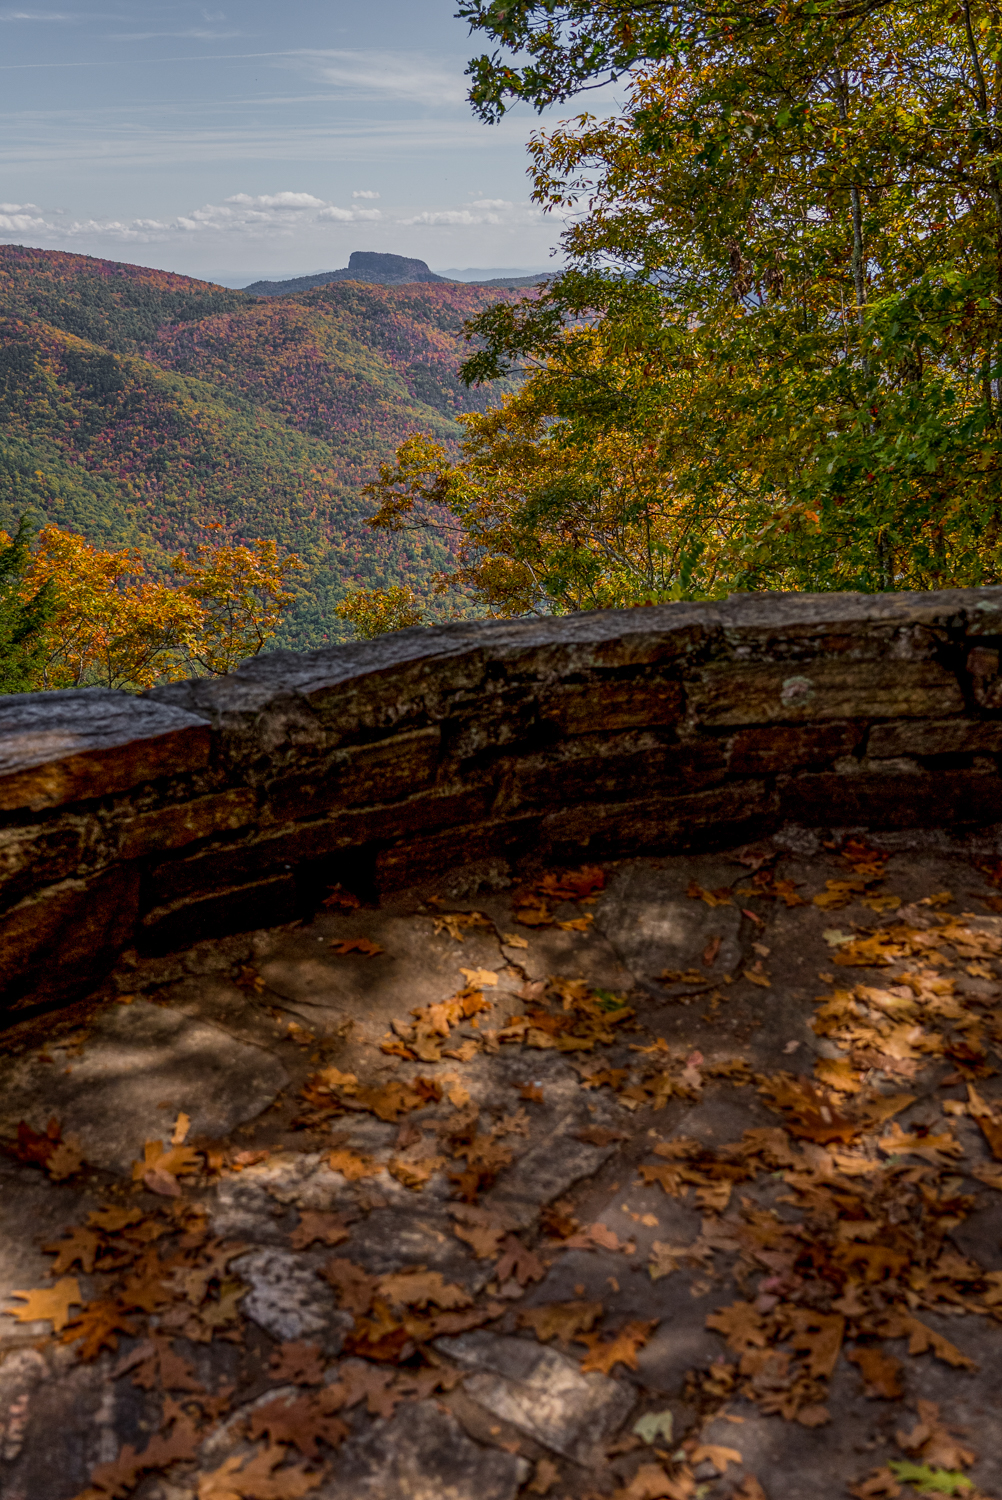 Where To See The Fall Foliage In North Carolina - Chestoa View Overlook on the Blue Ridge Parkway in NC